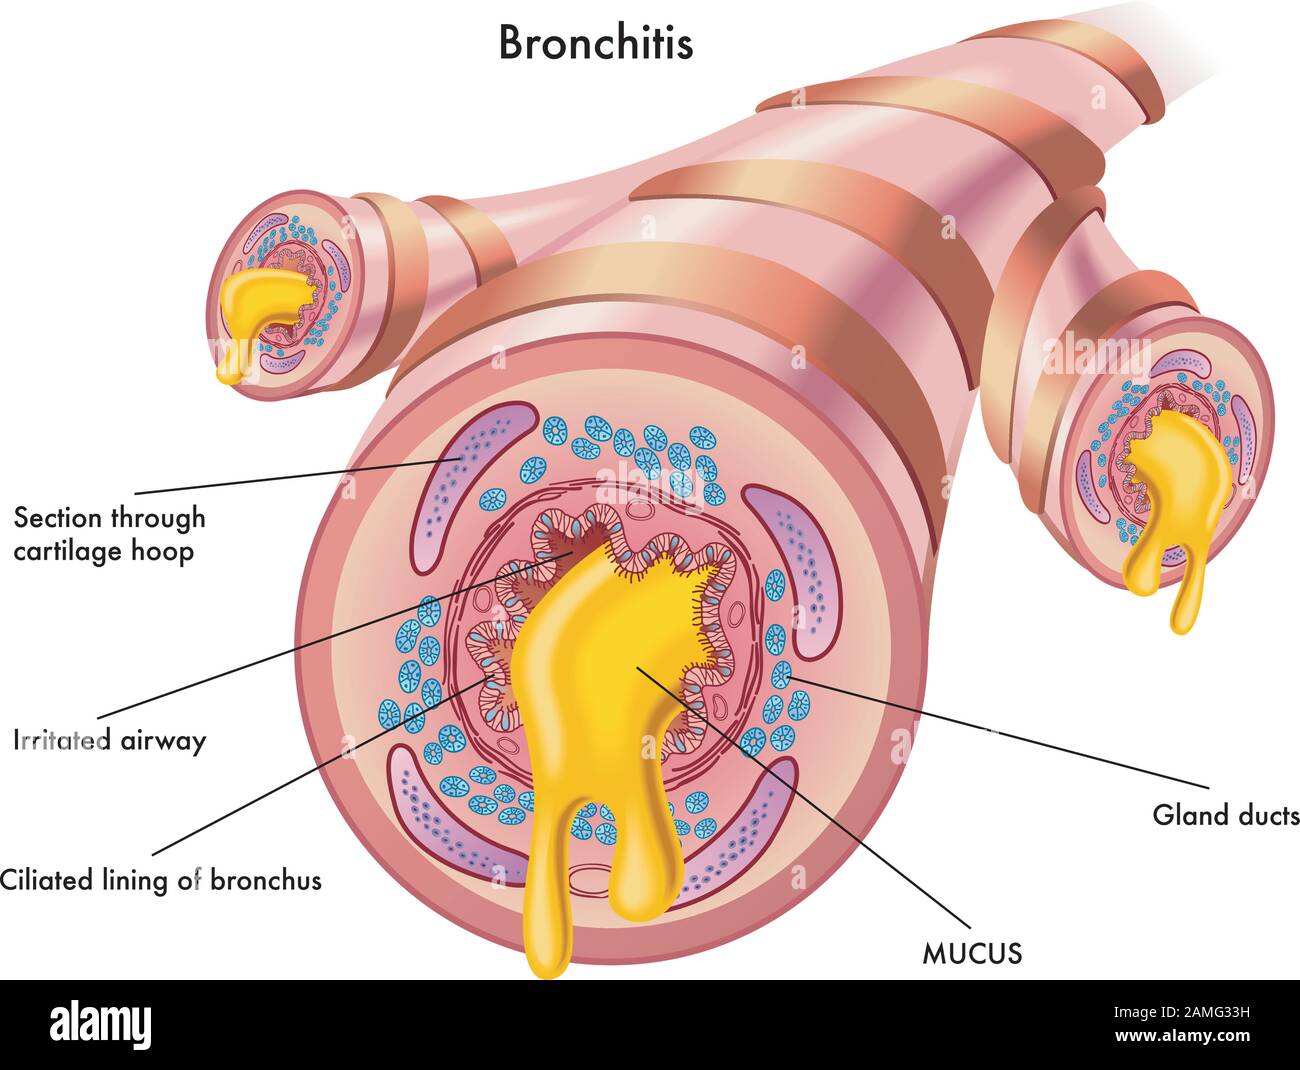 Medical illustration of the effects of the bronchitis. Stock Vector